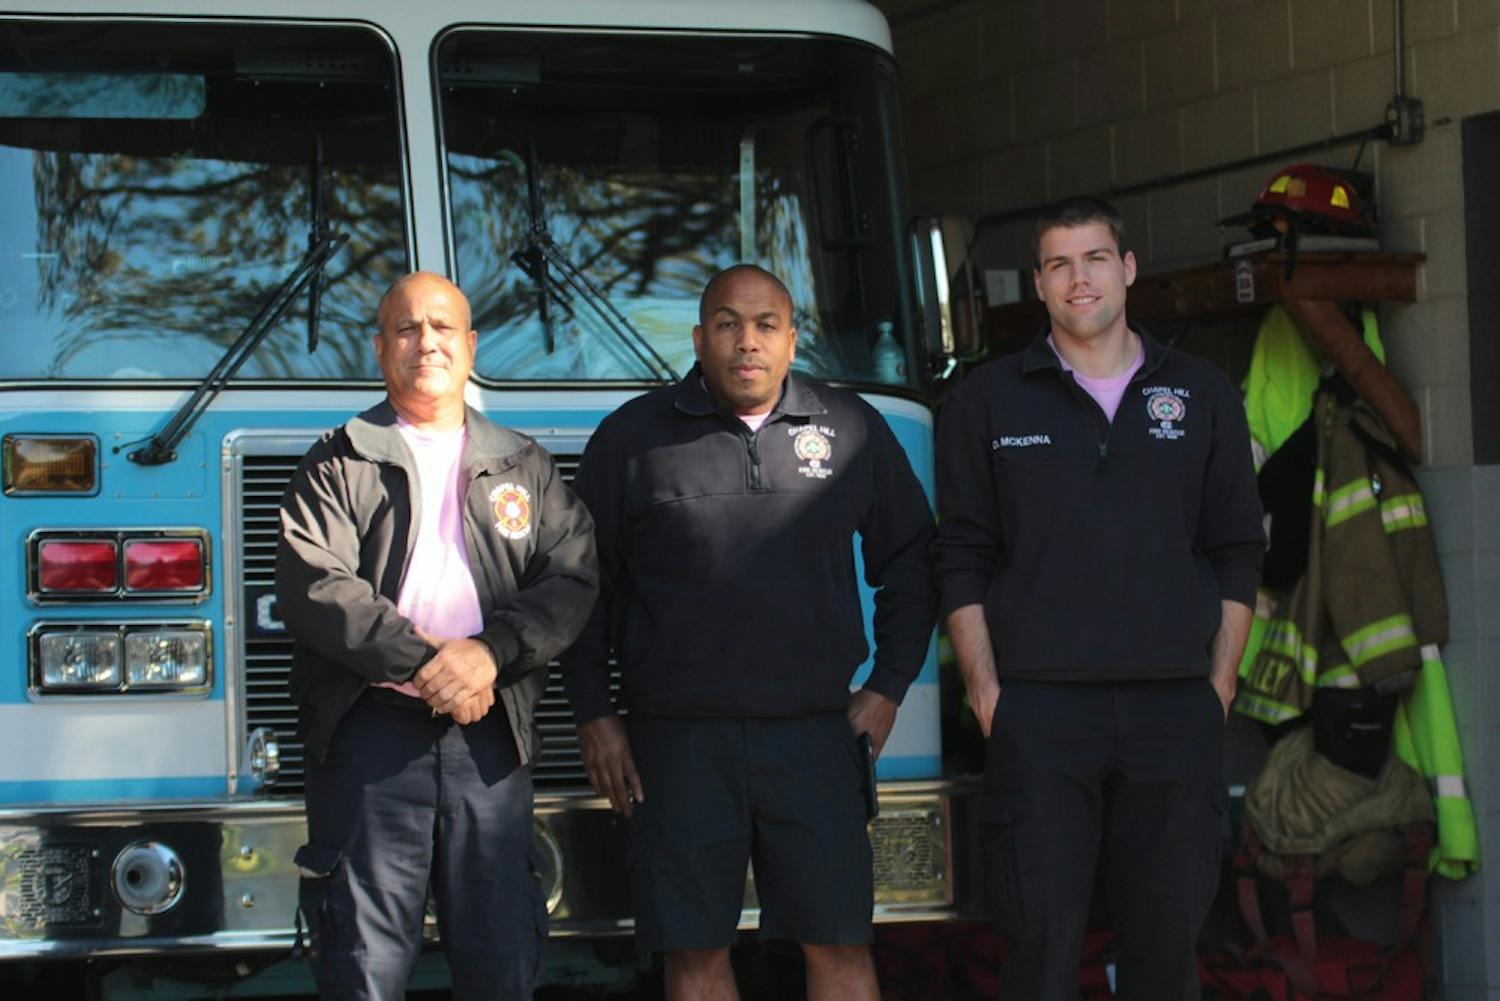 Chapel Hill Firefighters Richard Bucci (left), Devin McKenna (right) and Fire Equipment Operator Keith Alston (middle) pose at Chapel Hill Fire Station 2.&nbsp;